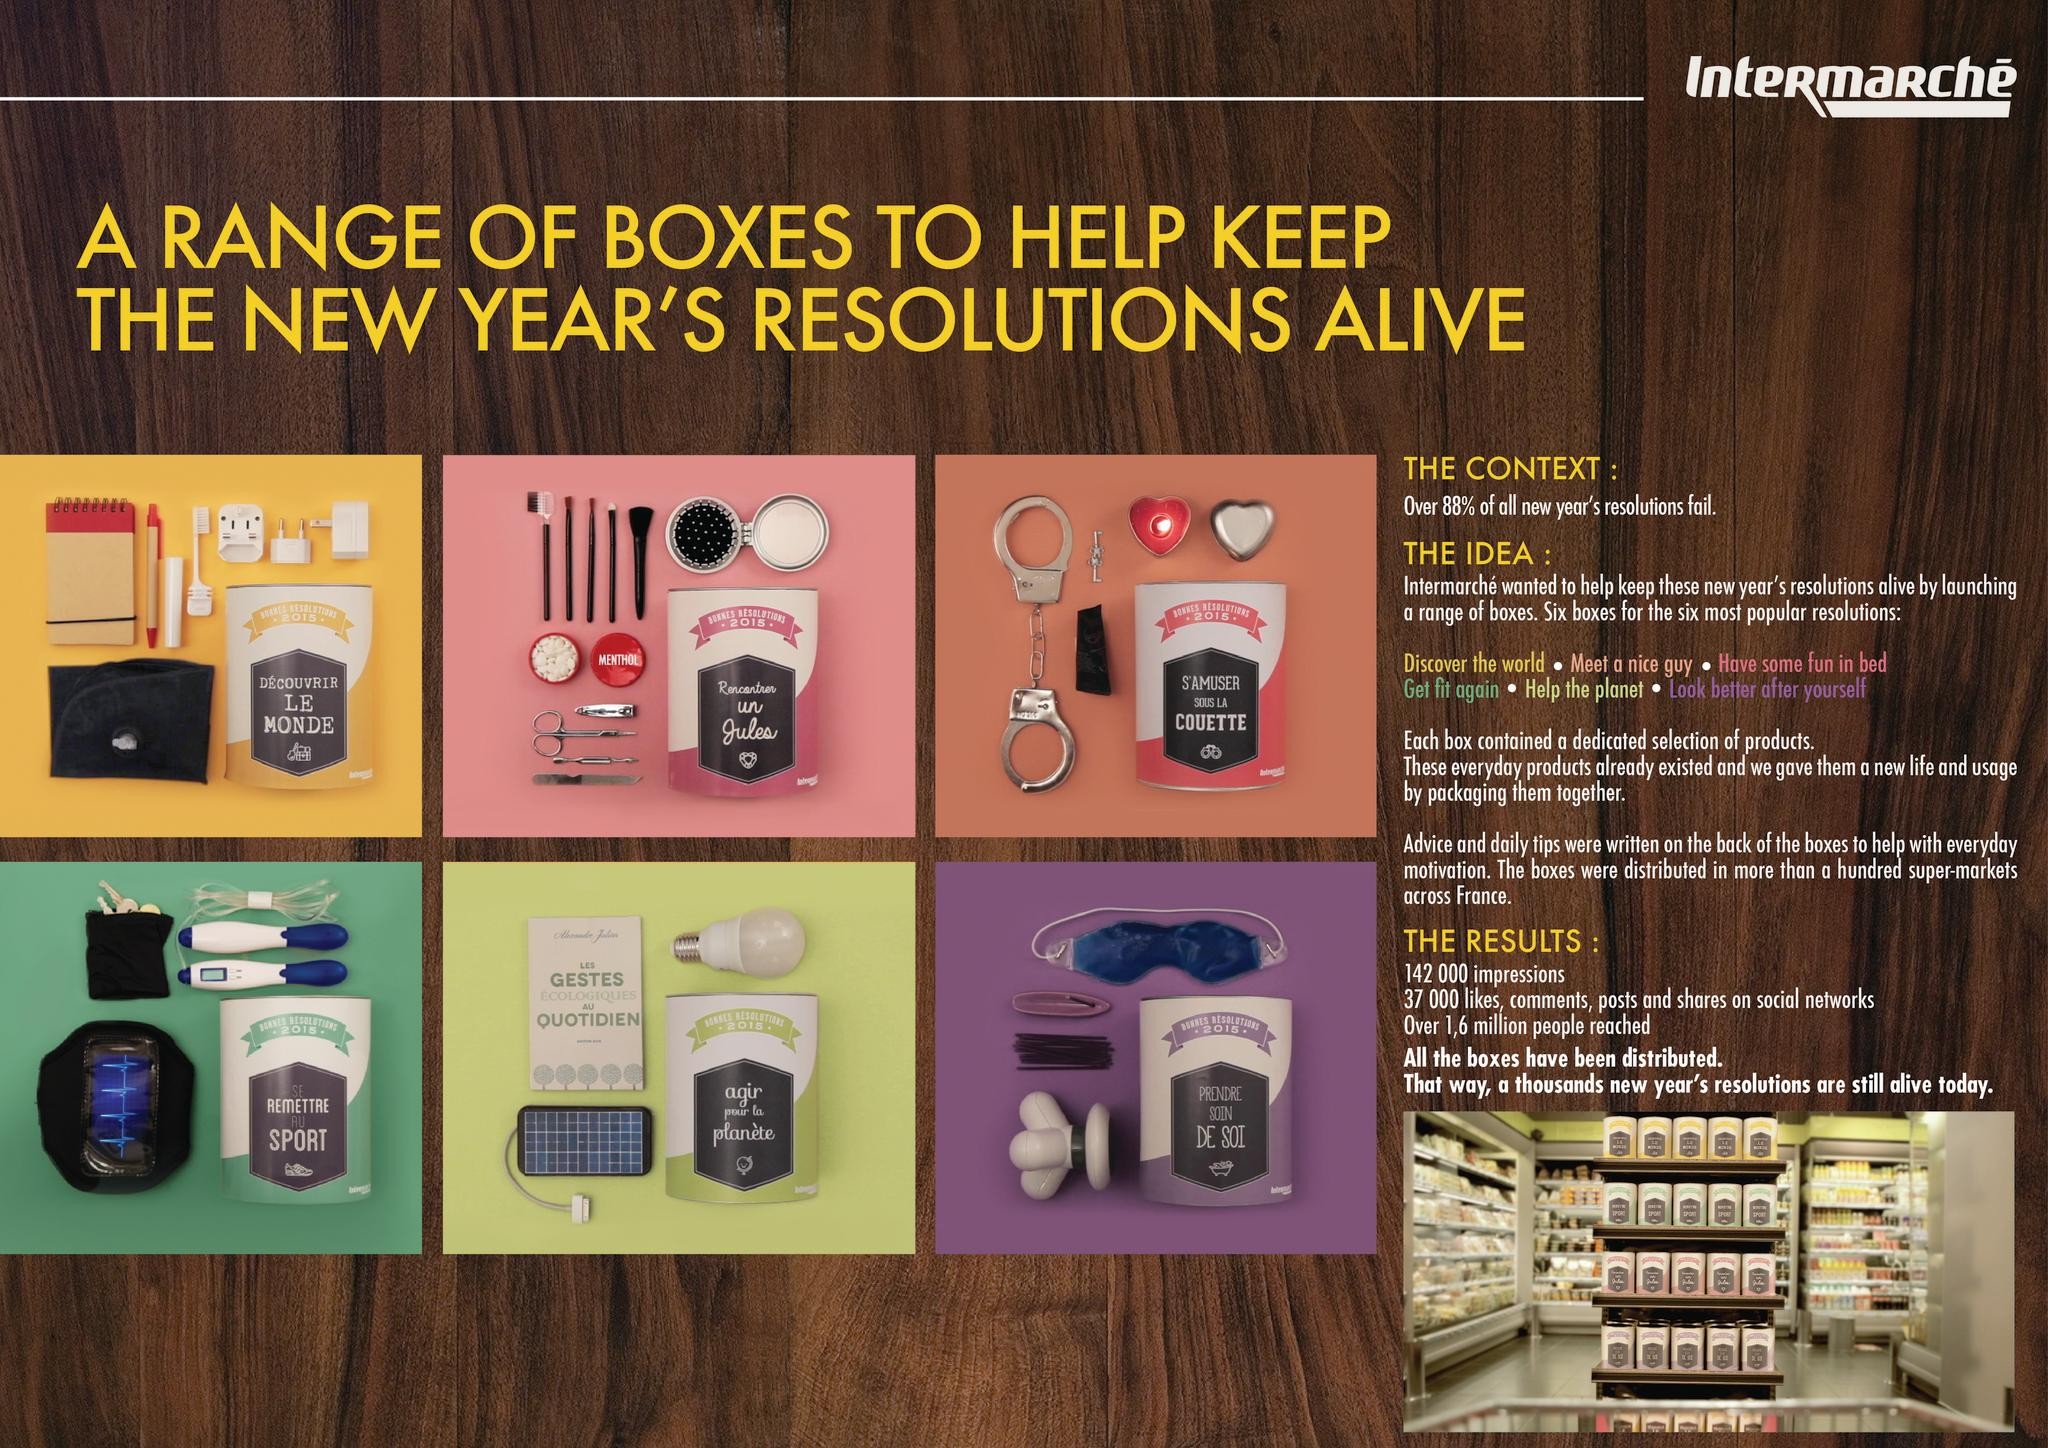 THE NEW YEAR’S RESOLUTIONS BOXES